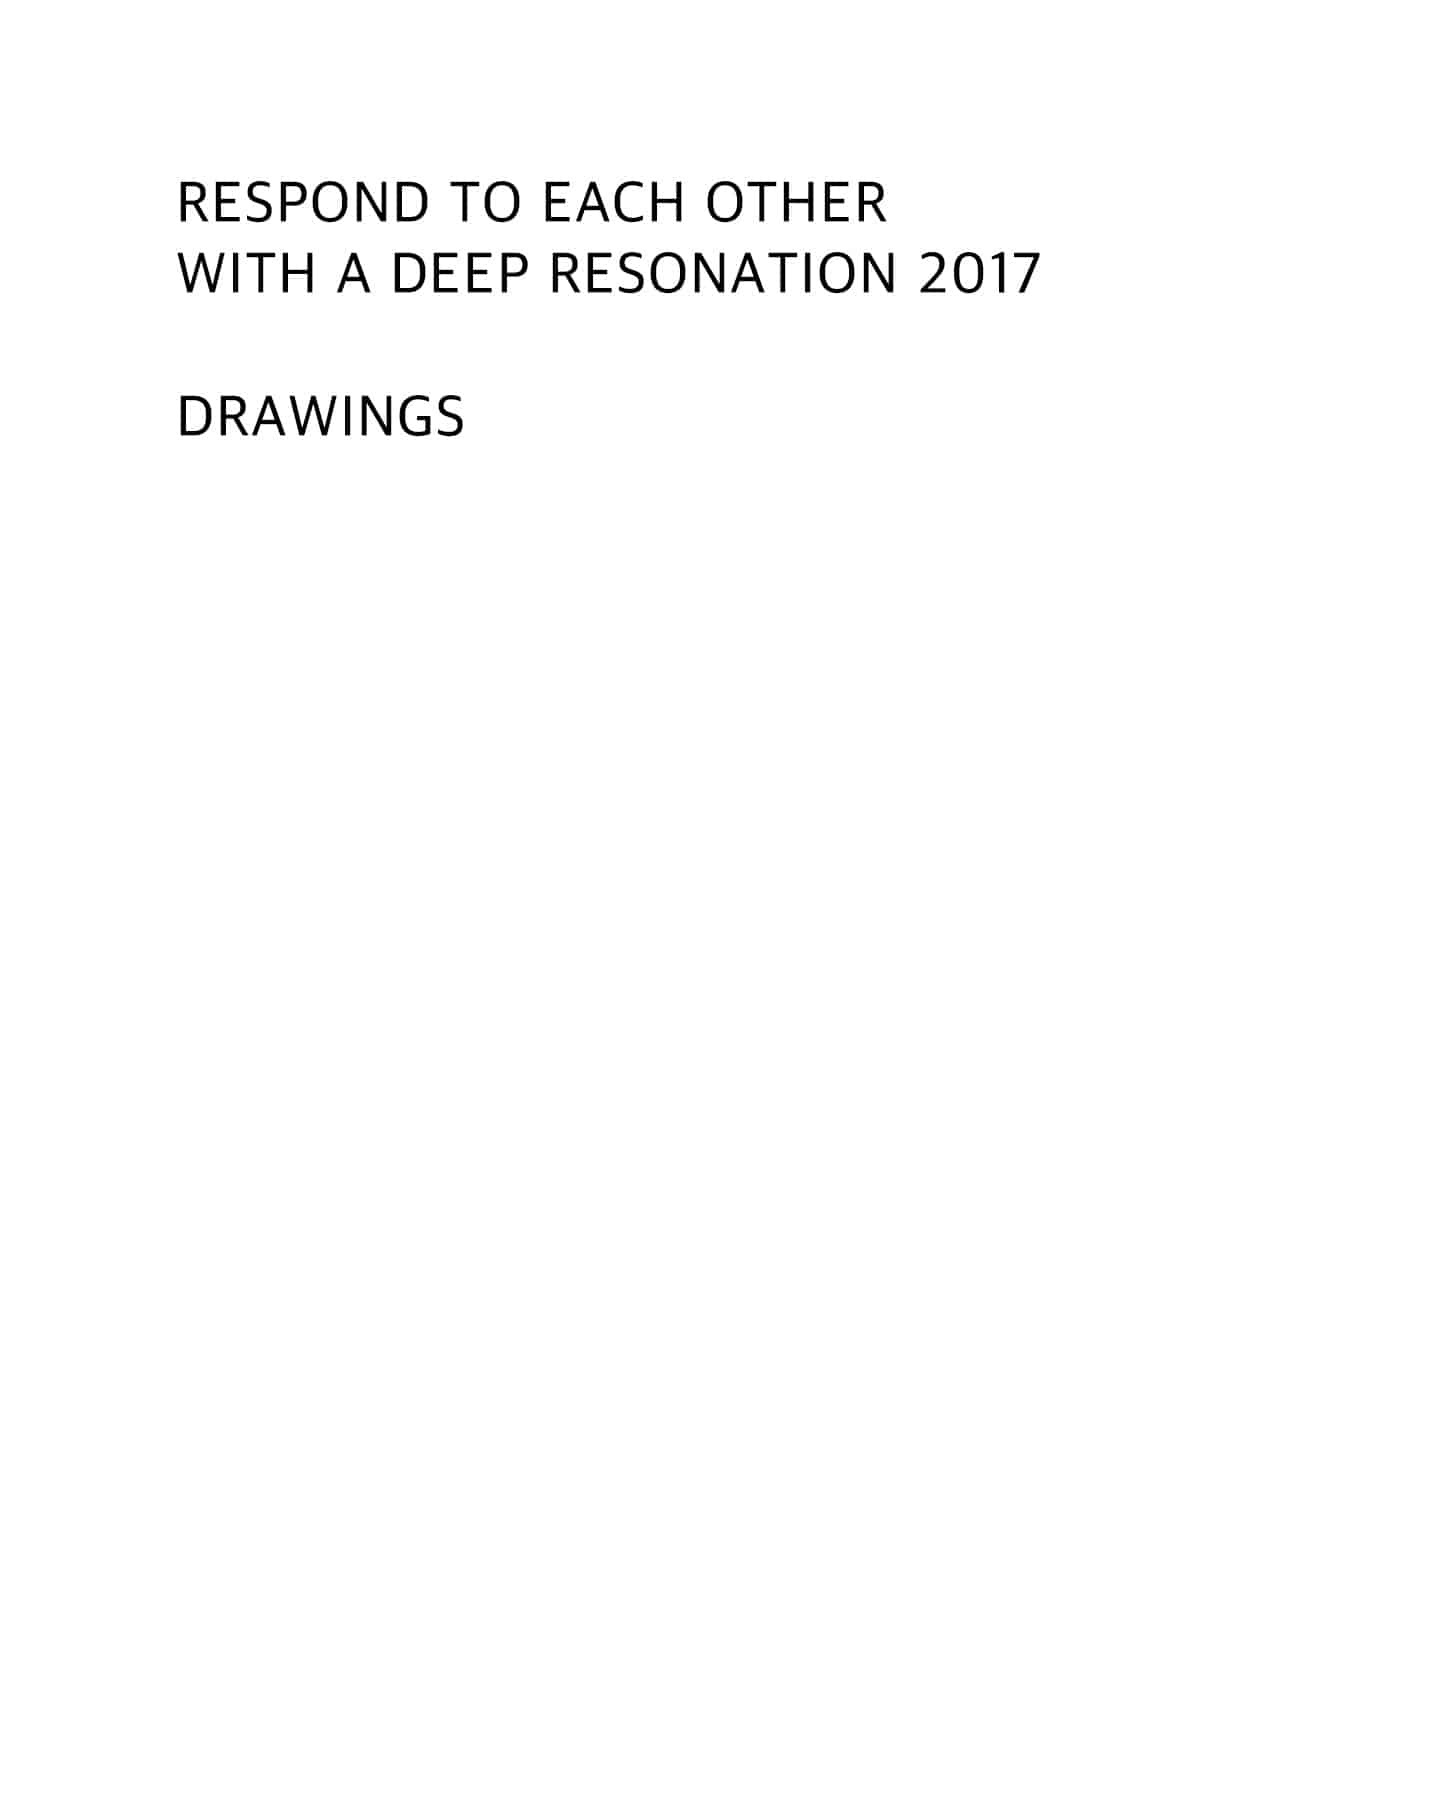 RESPOND TO EACH OTHER WITH A DEEP RESONATION 2017, drawings